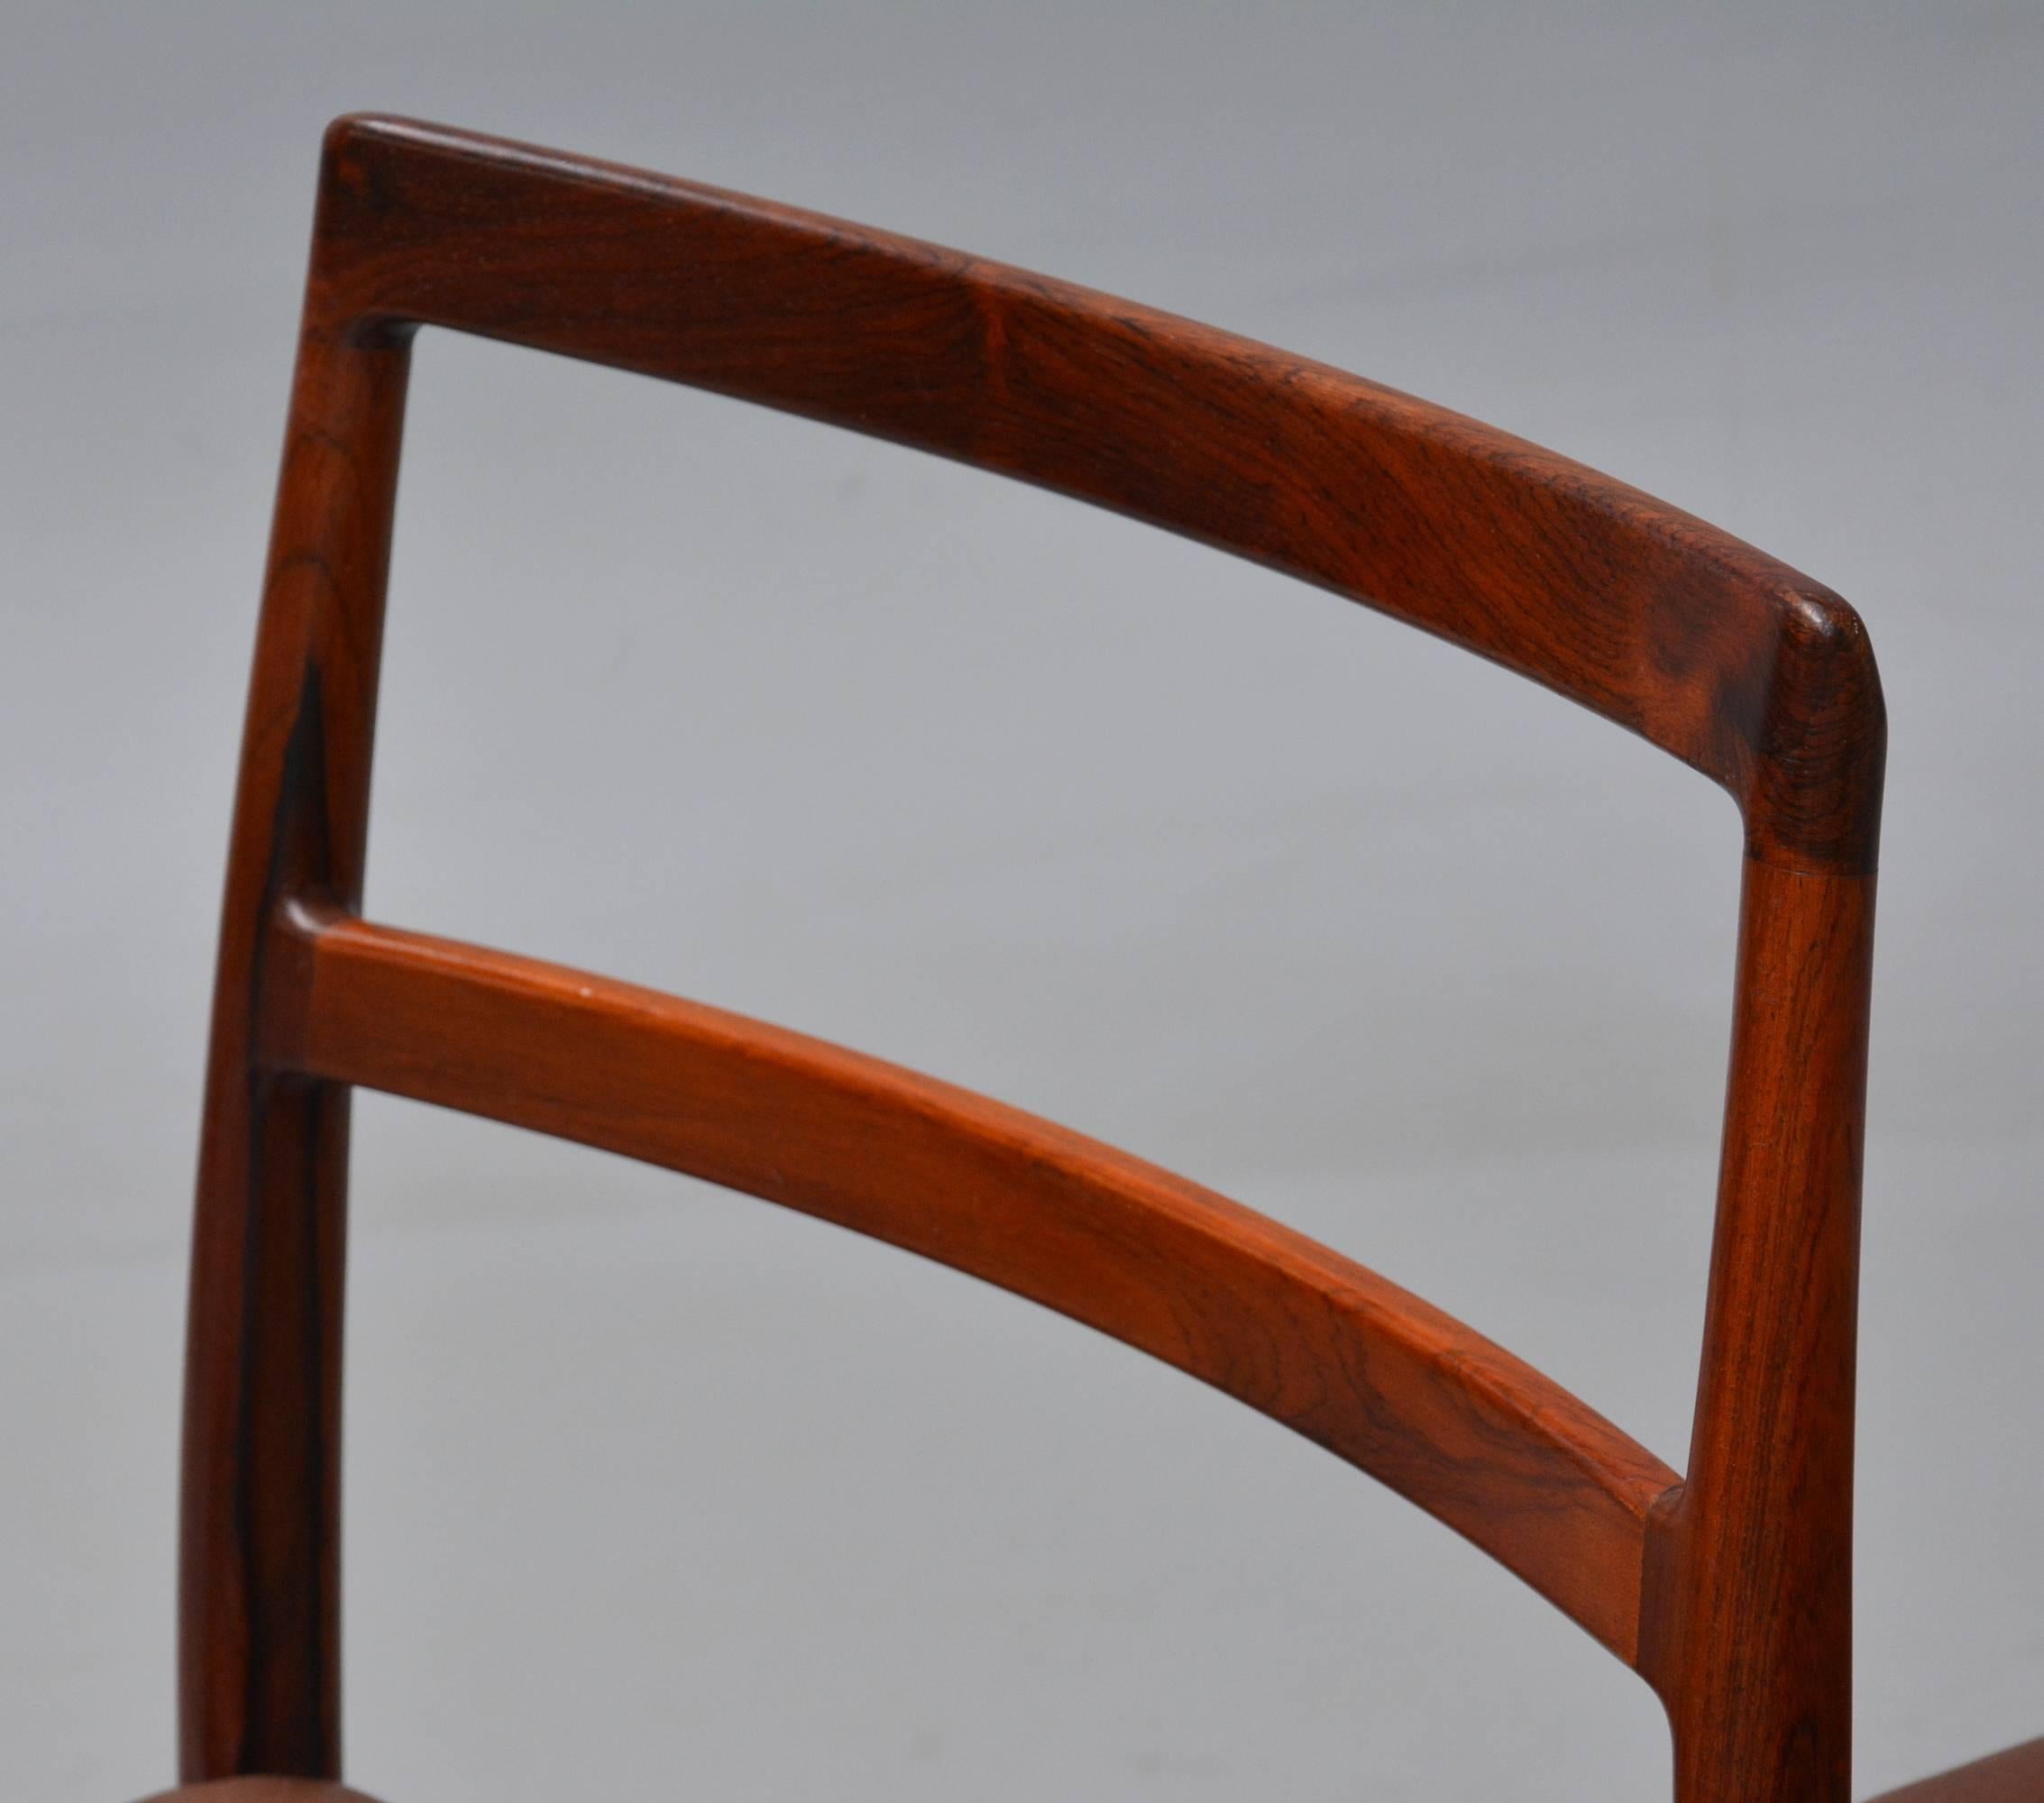 Danish 1950s Arne Vodder Rosewood Dining Chairs, Inc. Reupholstery